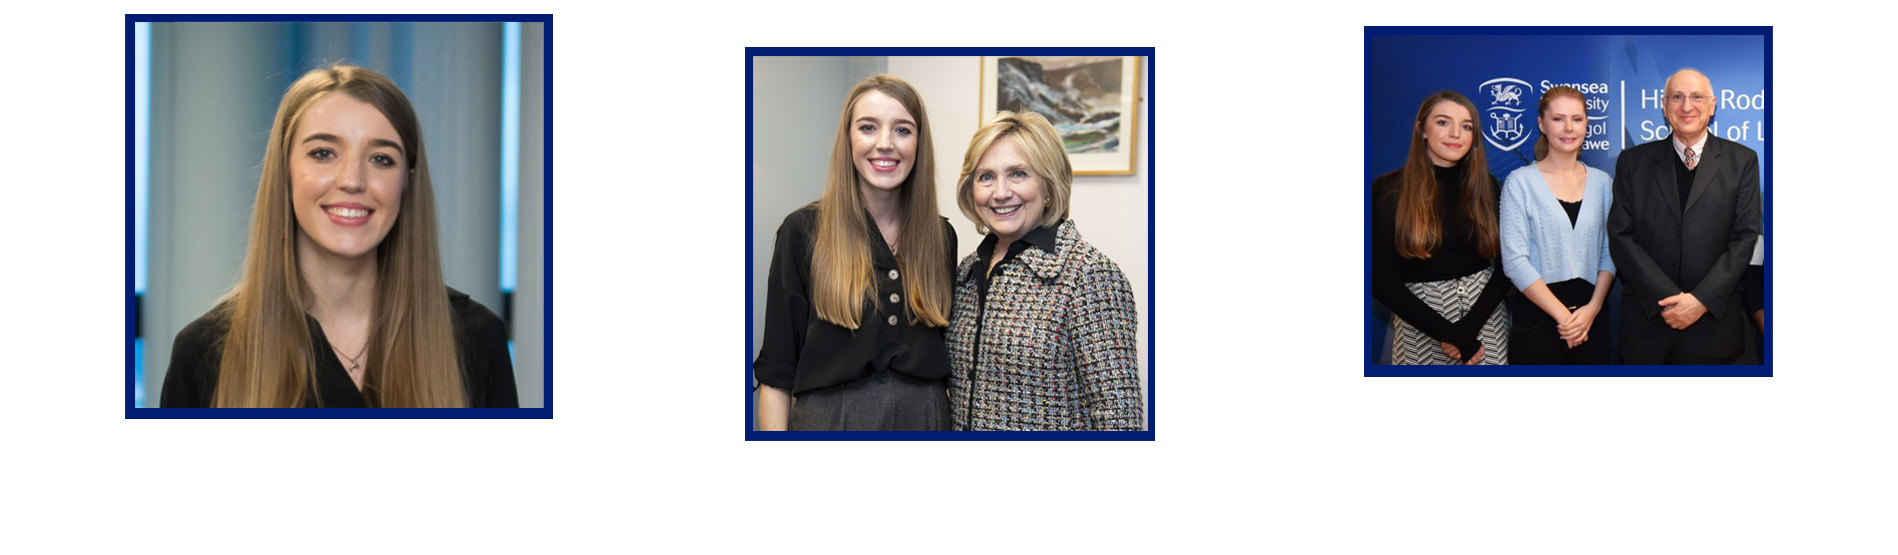 charlotte with hillary clinton